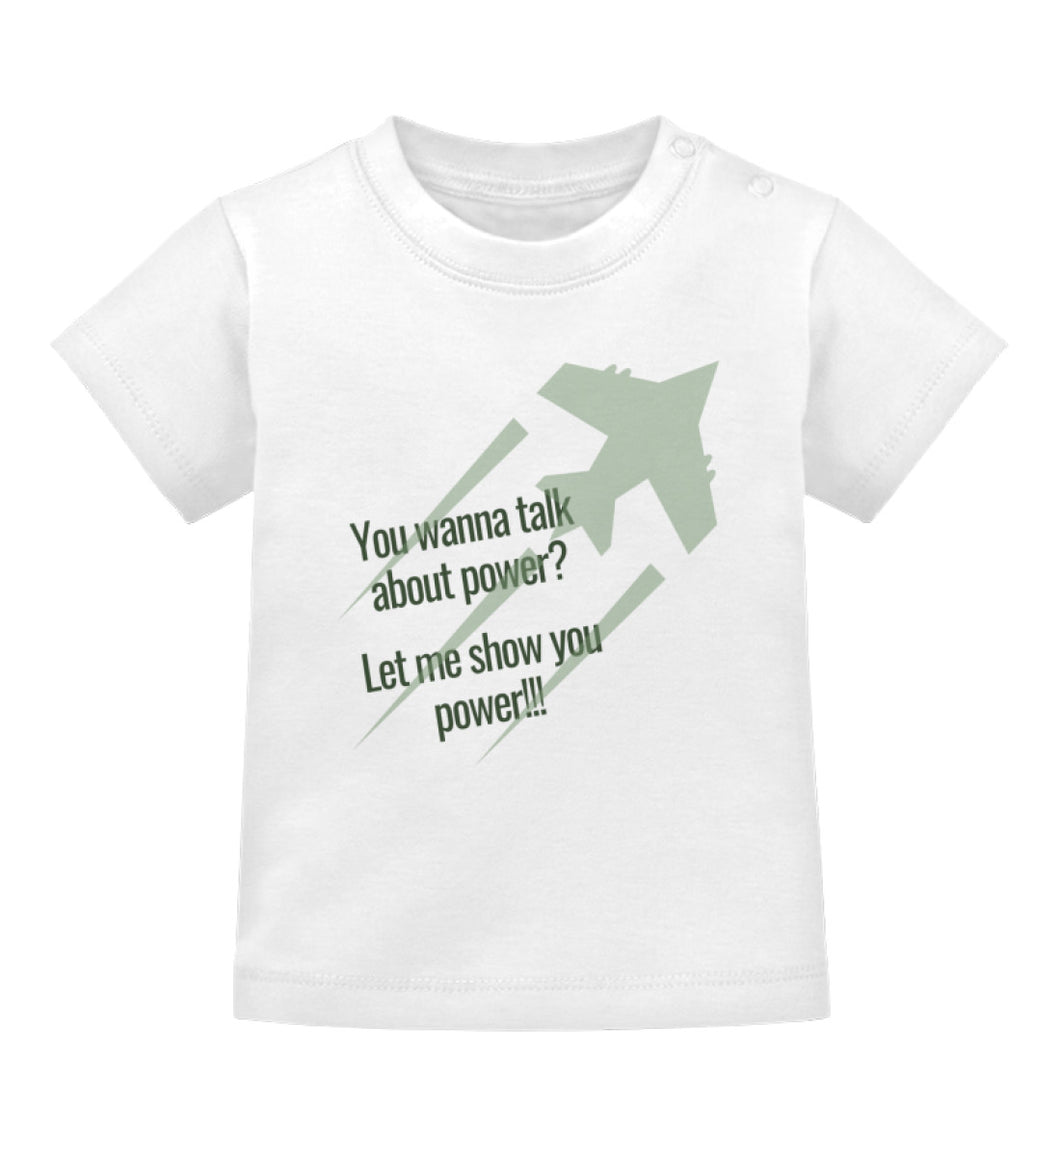 You wanna talk about power? - Baby T-Shirt